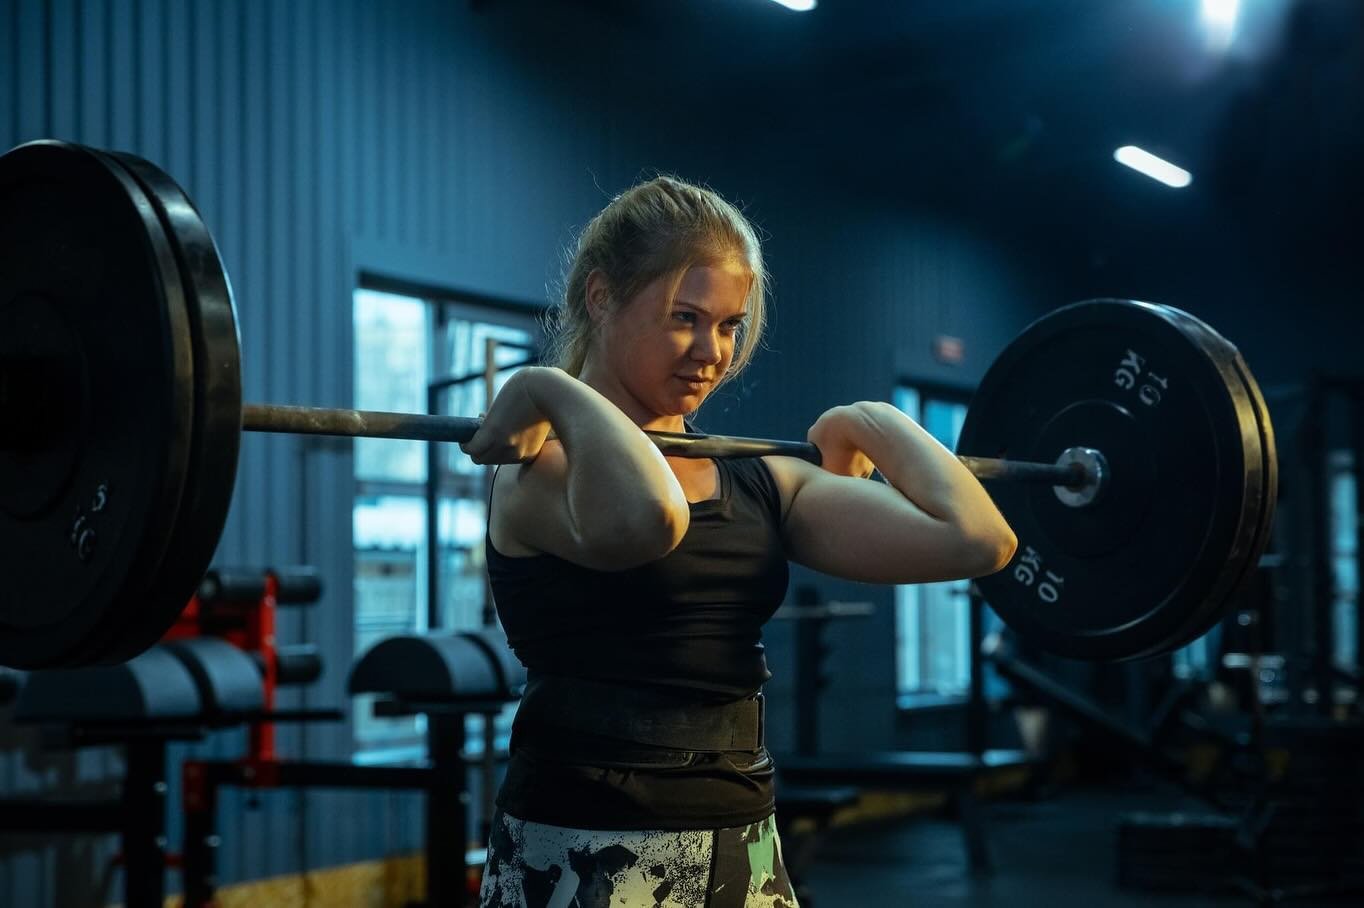 ‼️BRAND NEW FOR TEENS IN HARBOROUGH‼️
👉🏻 CrossFit Teens FREE TASTER - SAT 20th APRIL At Market Harborough&rsquo;s Only CrossFit Gym.
👉🏻 Ages 11 to 17
✅ Fun Workouts
✅ Learn Proper Technique (Including Barbell Lifts)
✅ Build Confidence
✅ Suitable 